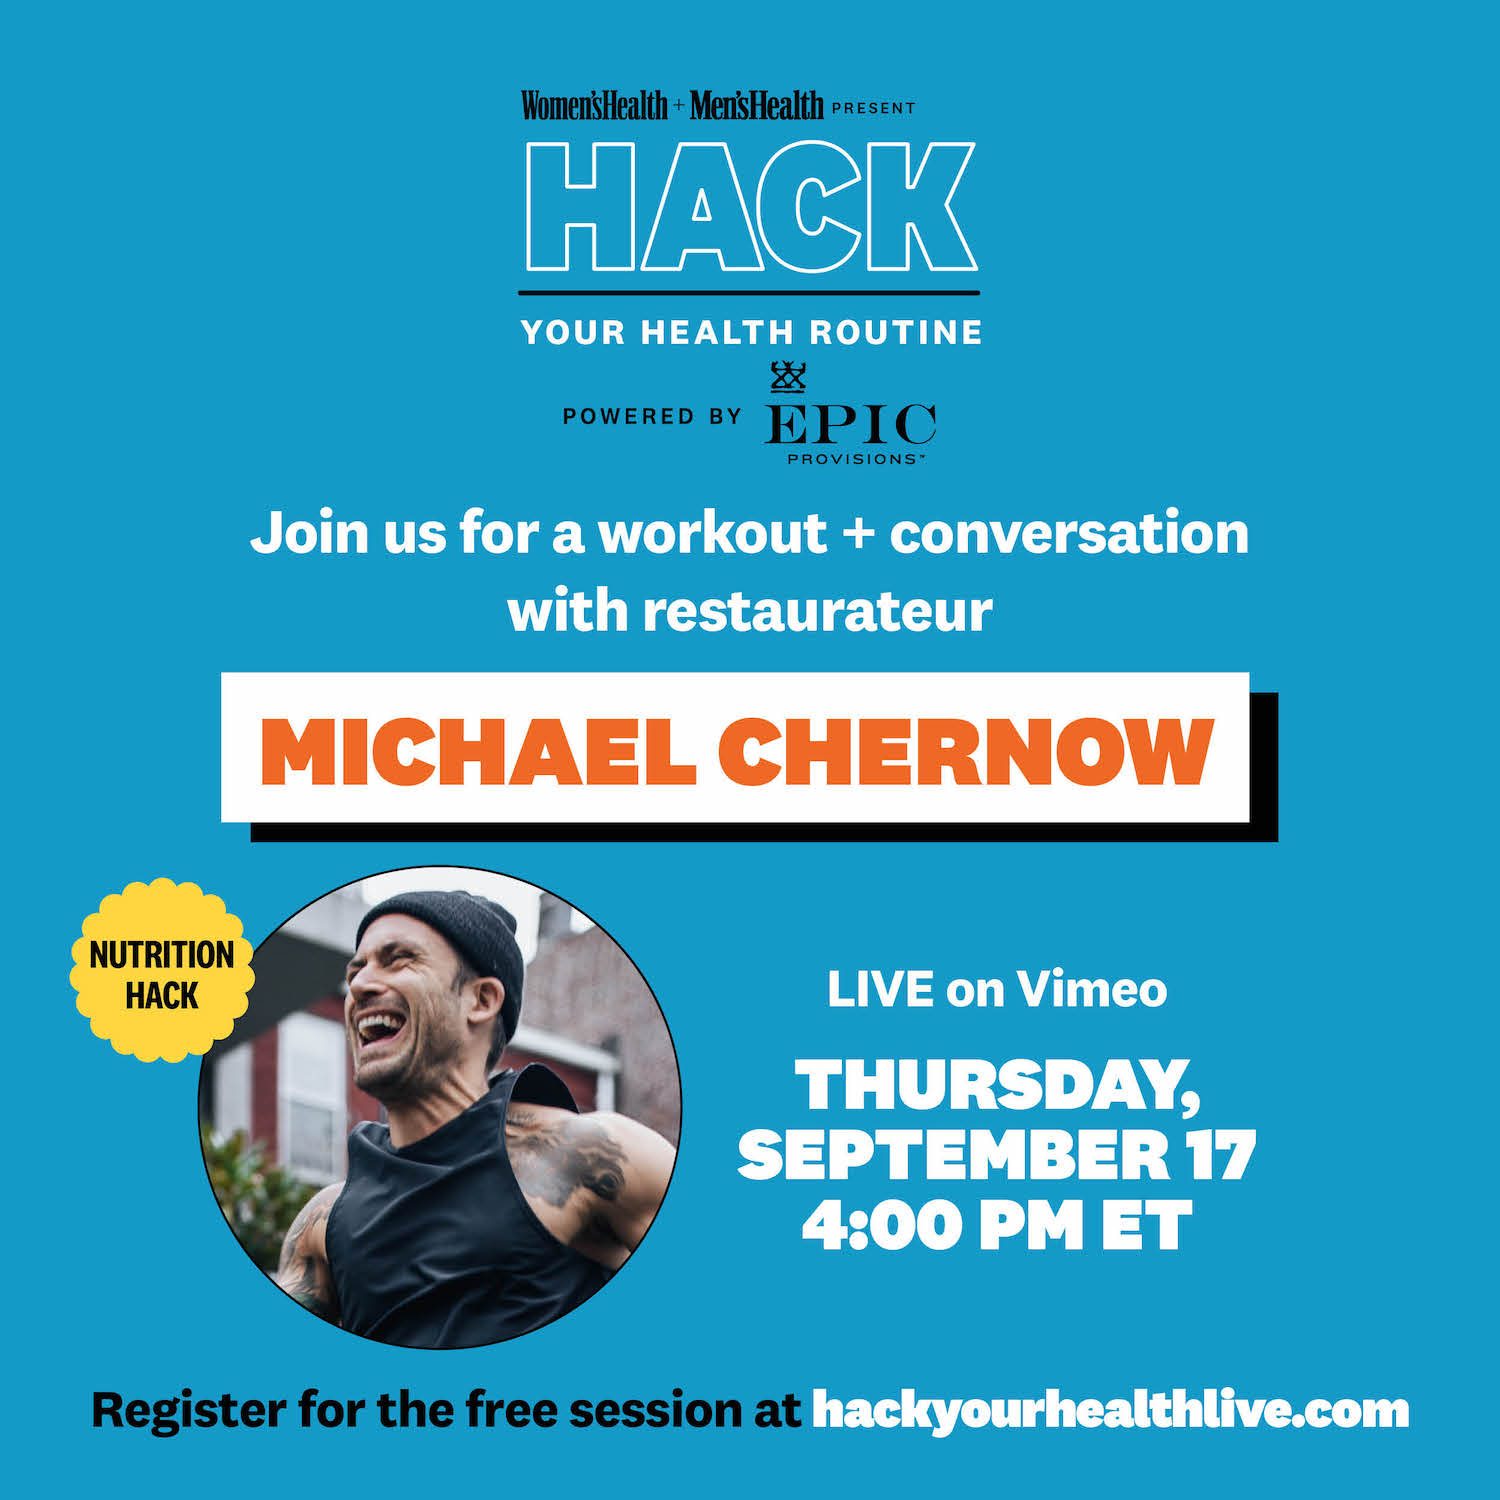 Women's Health + Men's Health Present Hack Your Health Routine (Powered by Epic Provisions)! Join us for a workout and conversation with restaurateur Michael Chernow. Register for the free session at hackyourhealthlive.com!